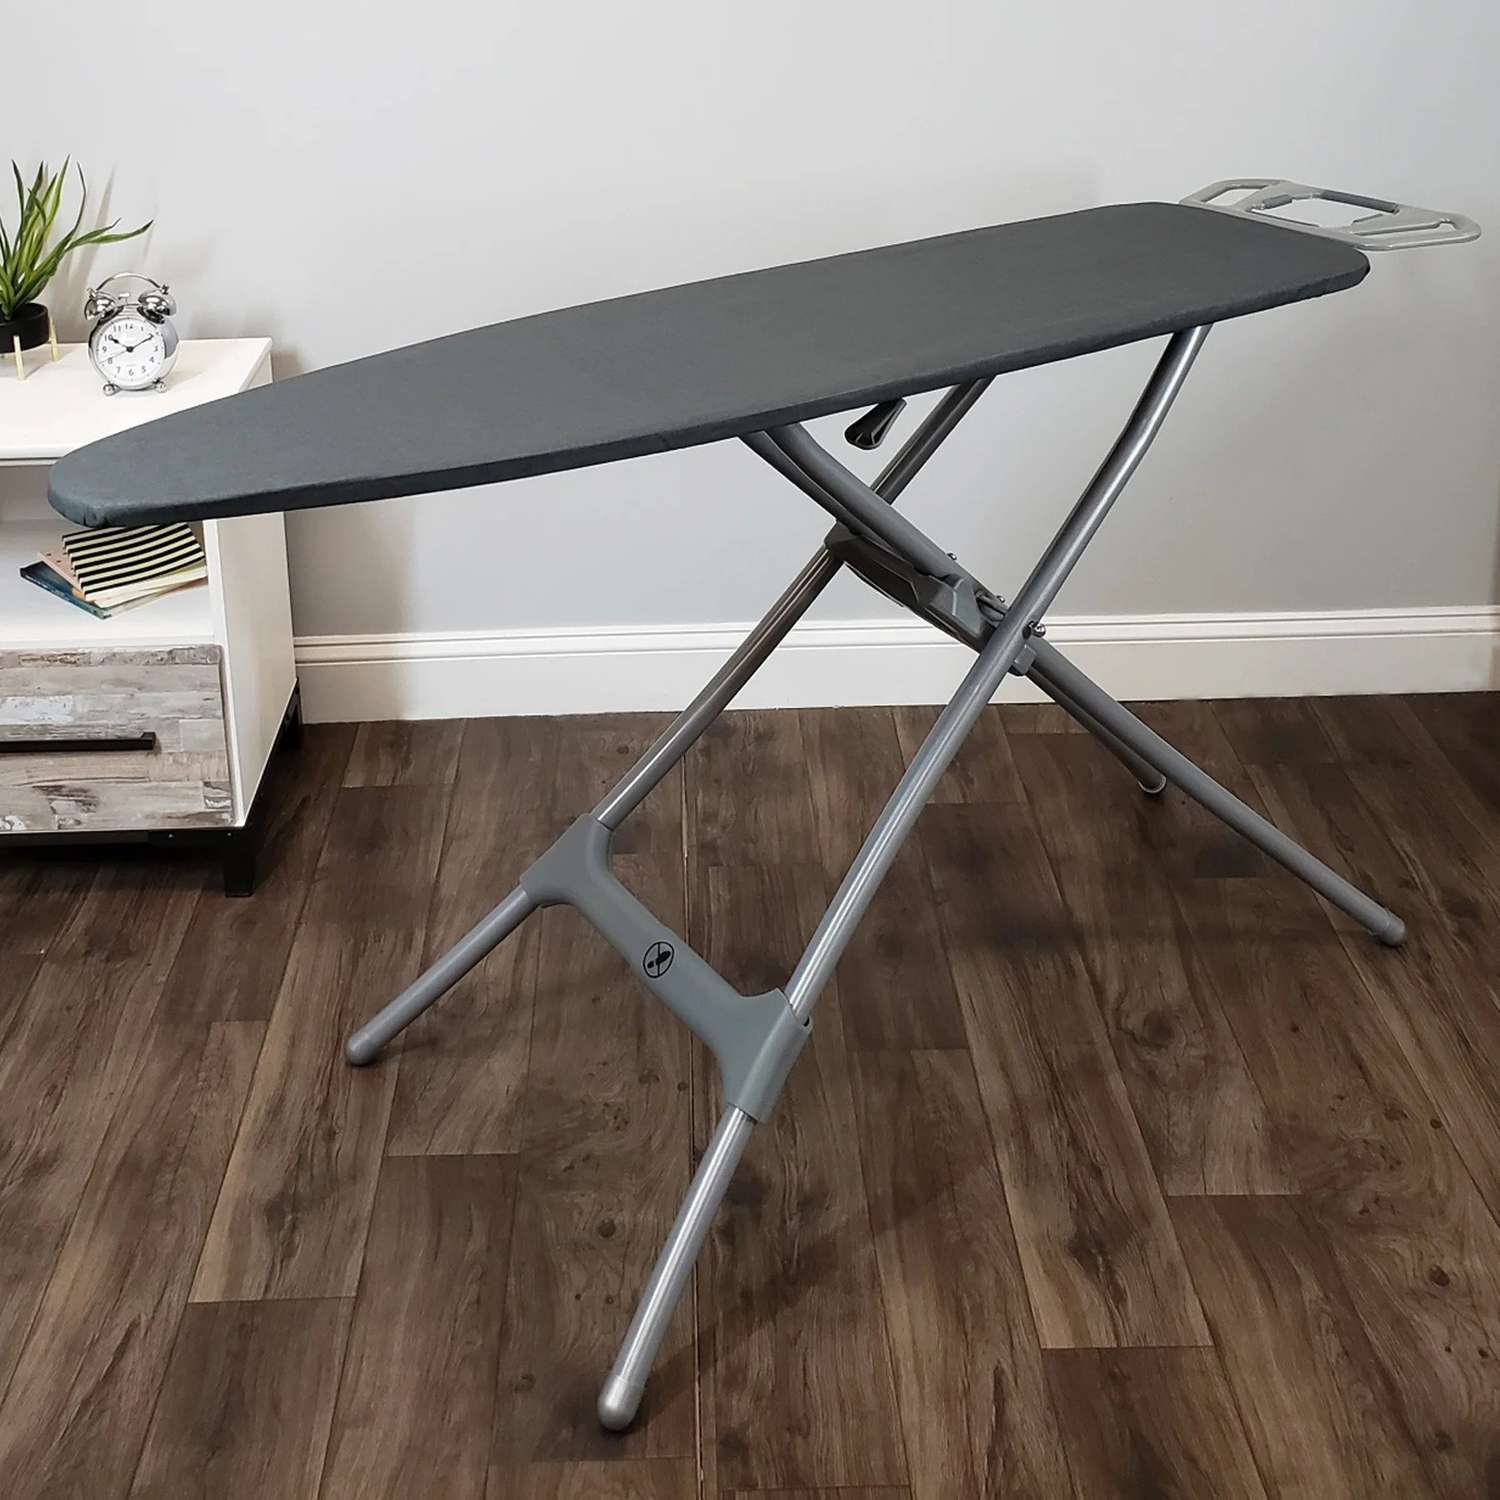 Small Ironing Board Space Saving Compact Over Door Wall Mounted Closet Folding 